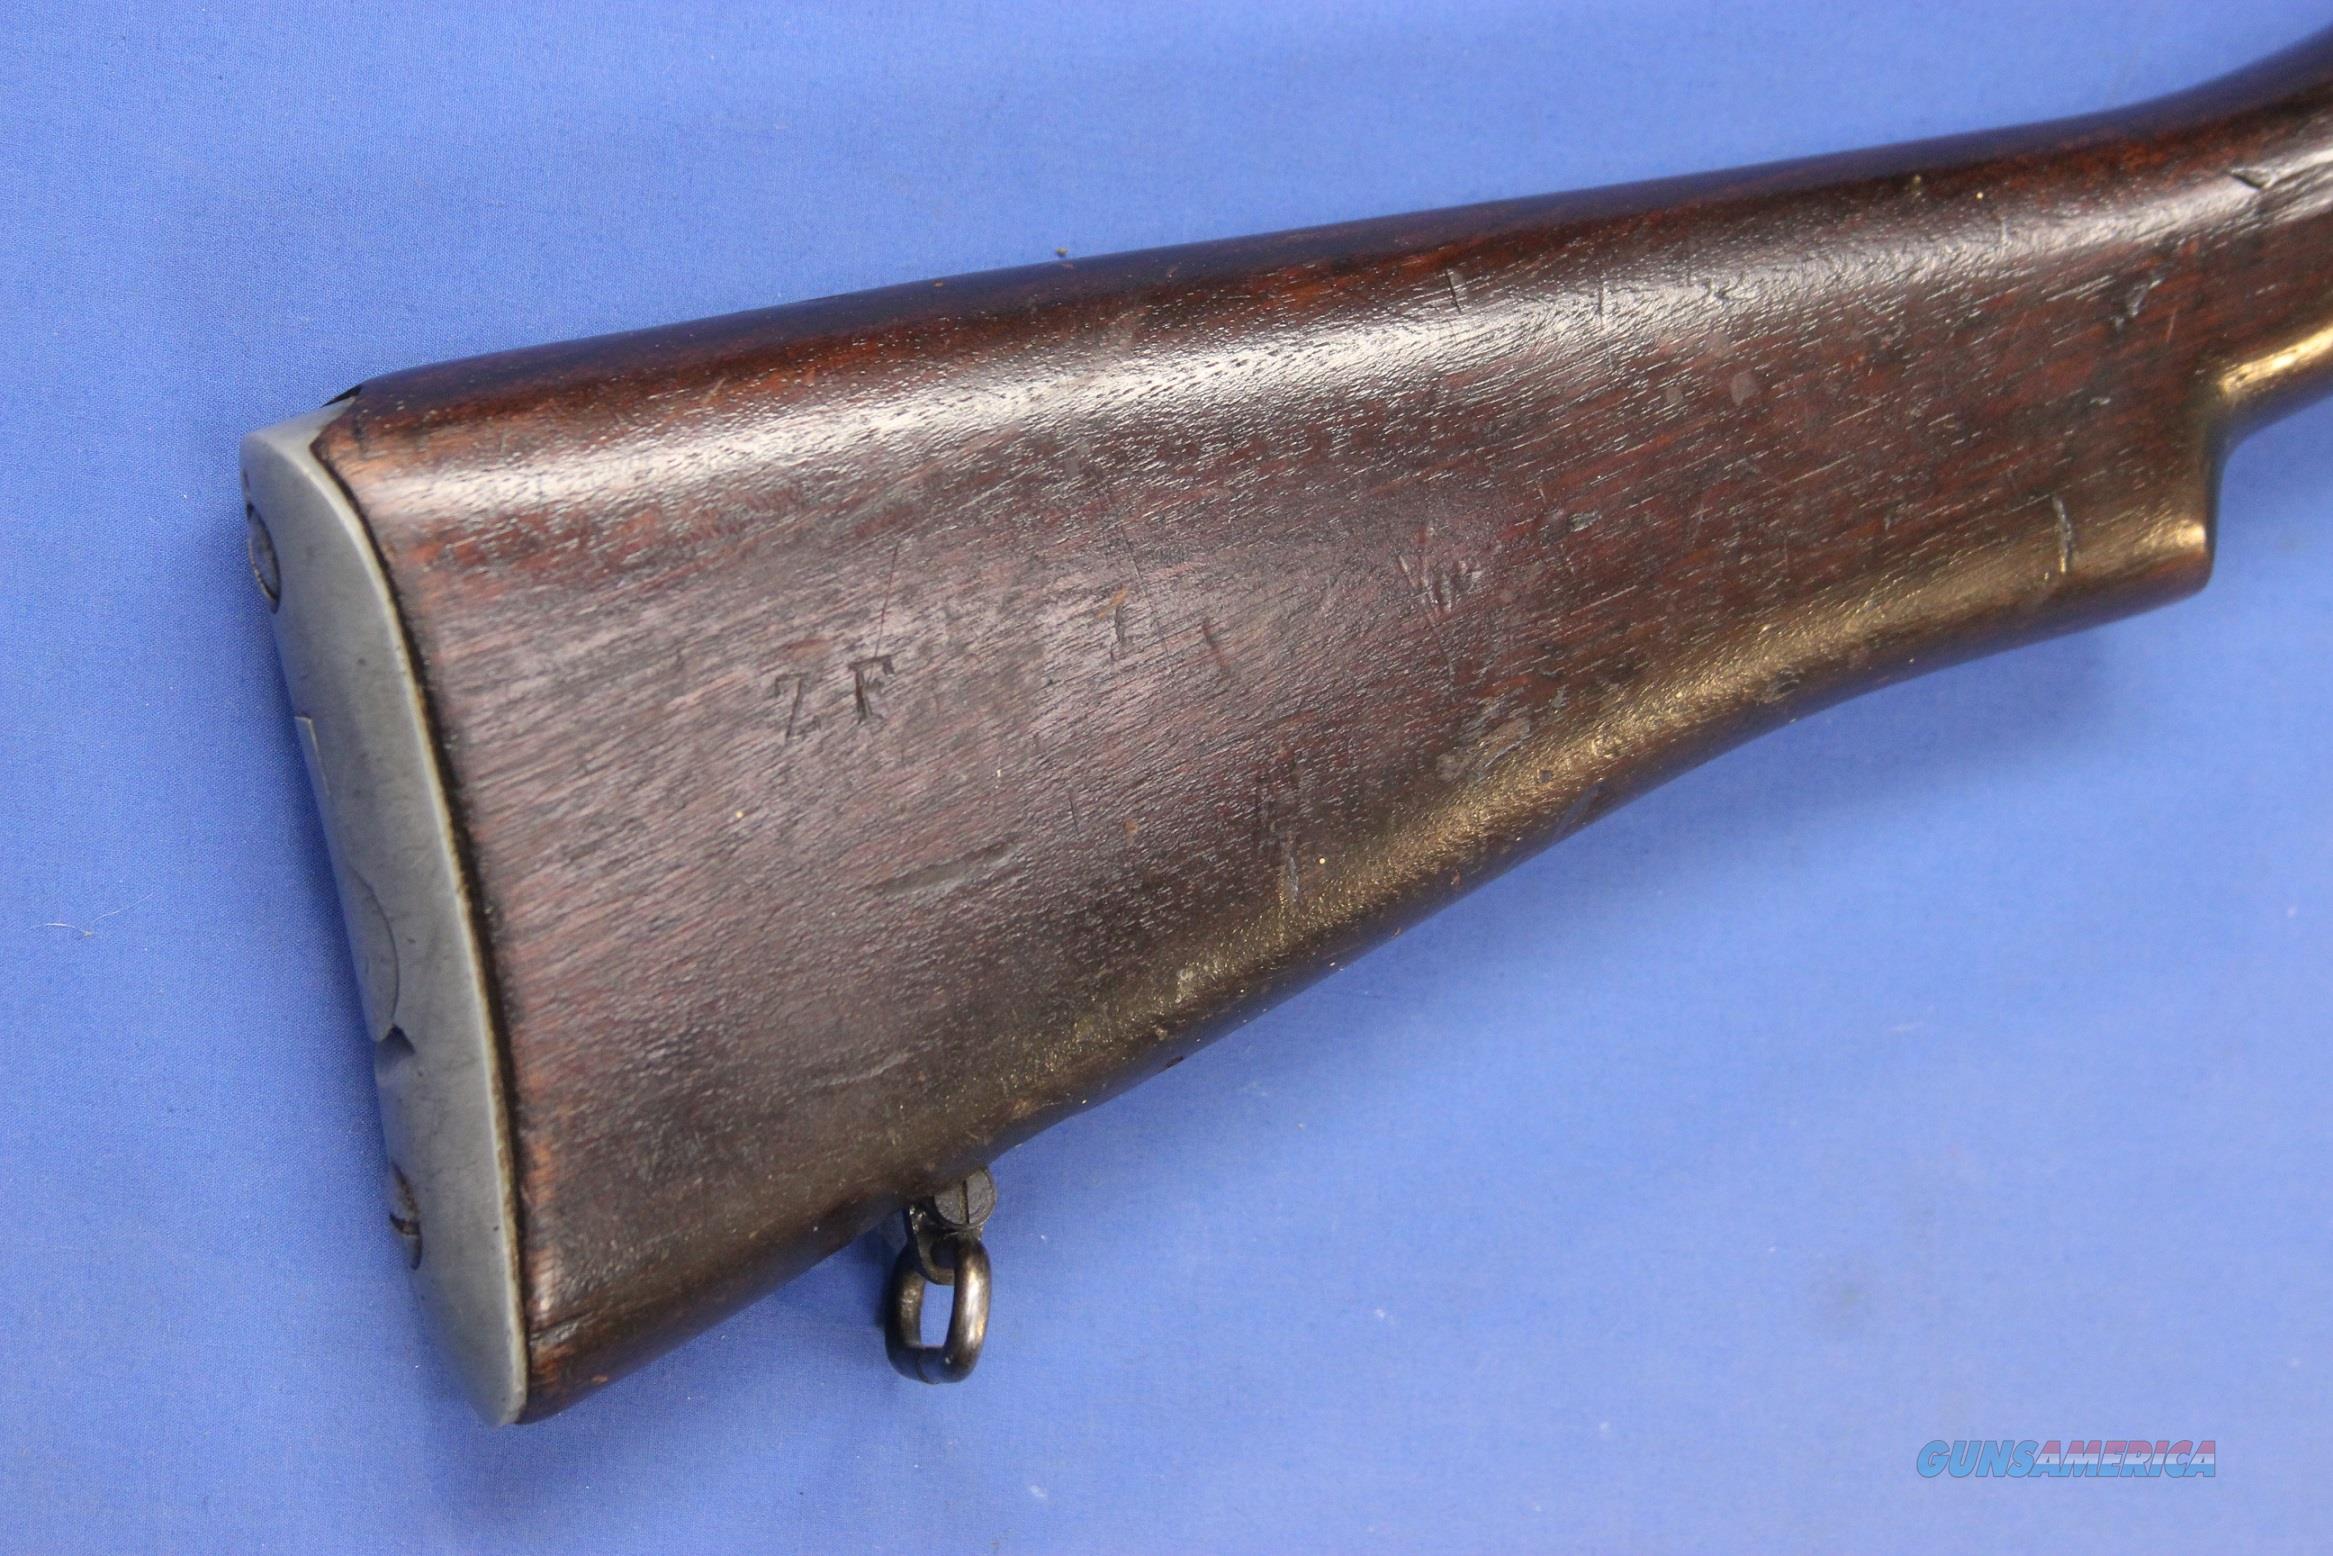 ENFIELD NO. 4 Mk 1* SMLE LONG BRANC for sale at :  995488914